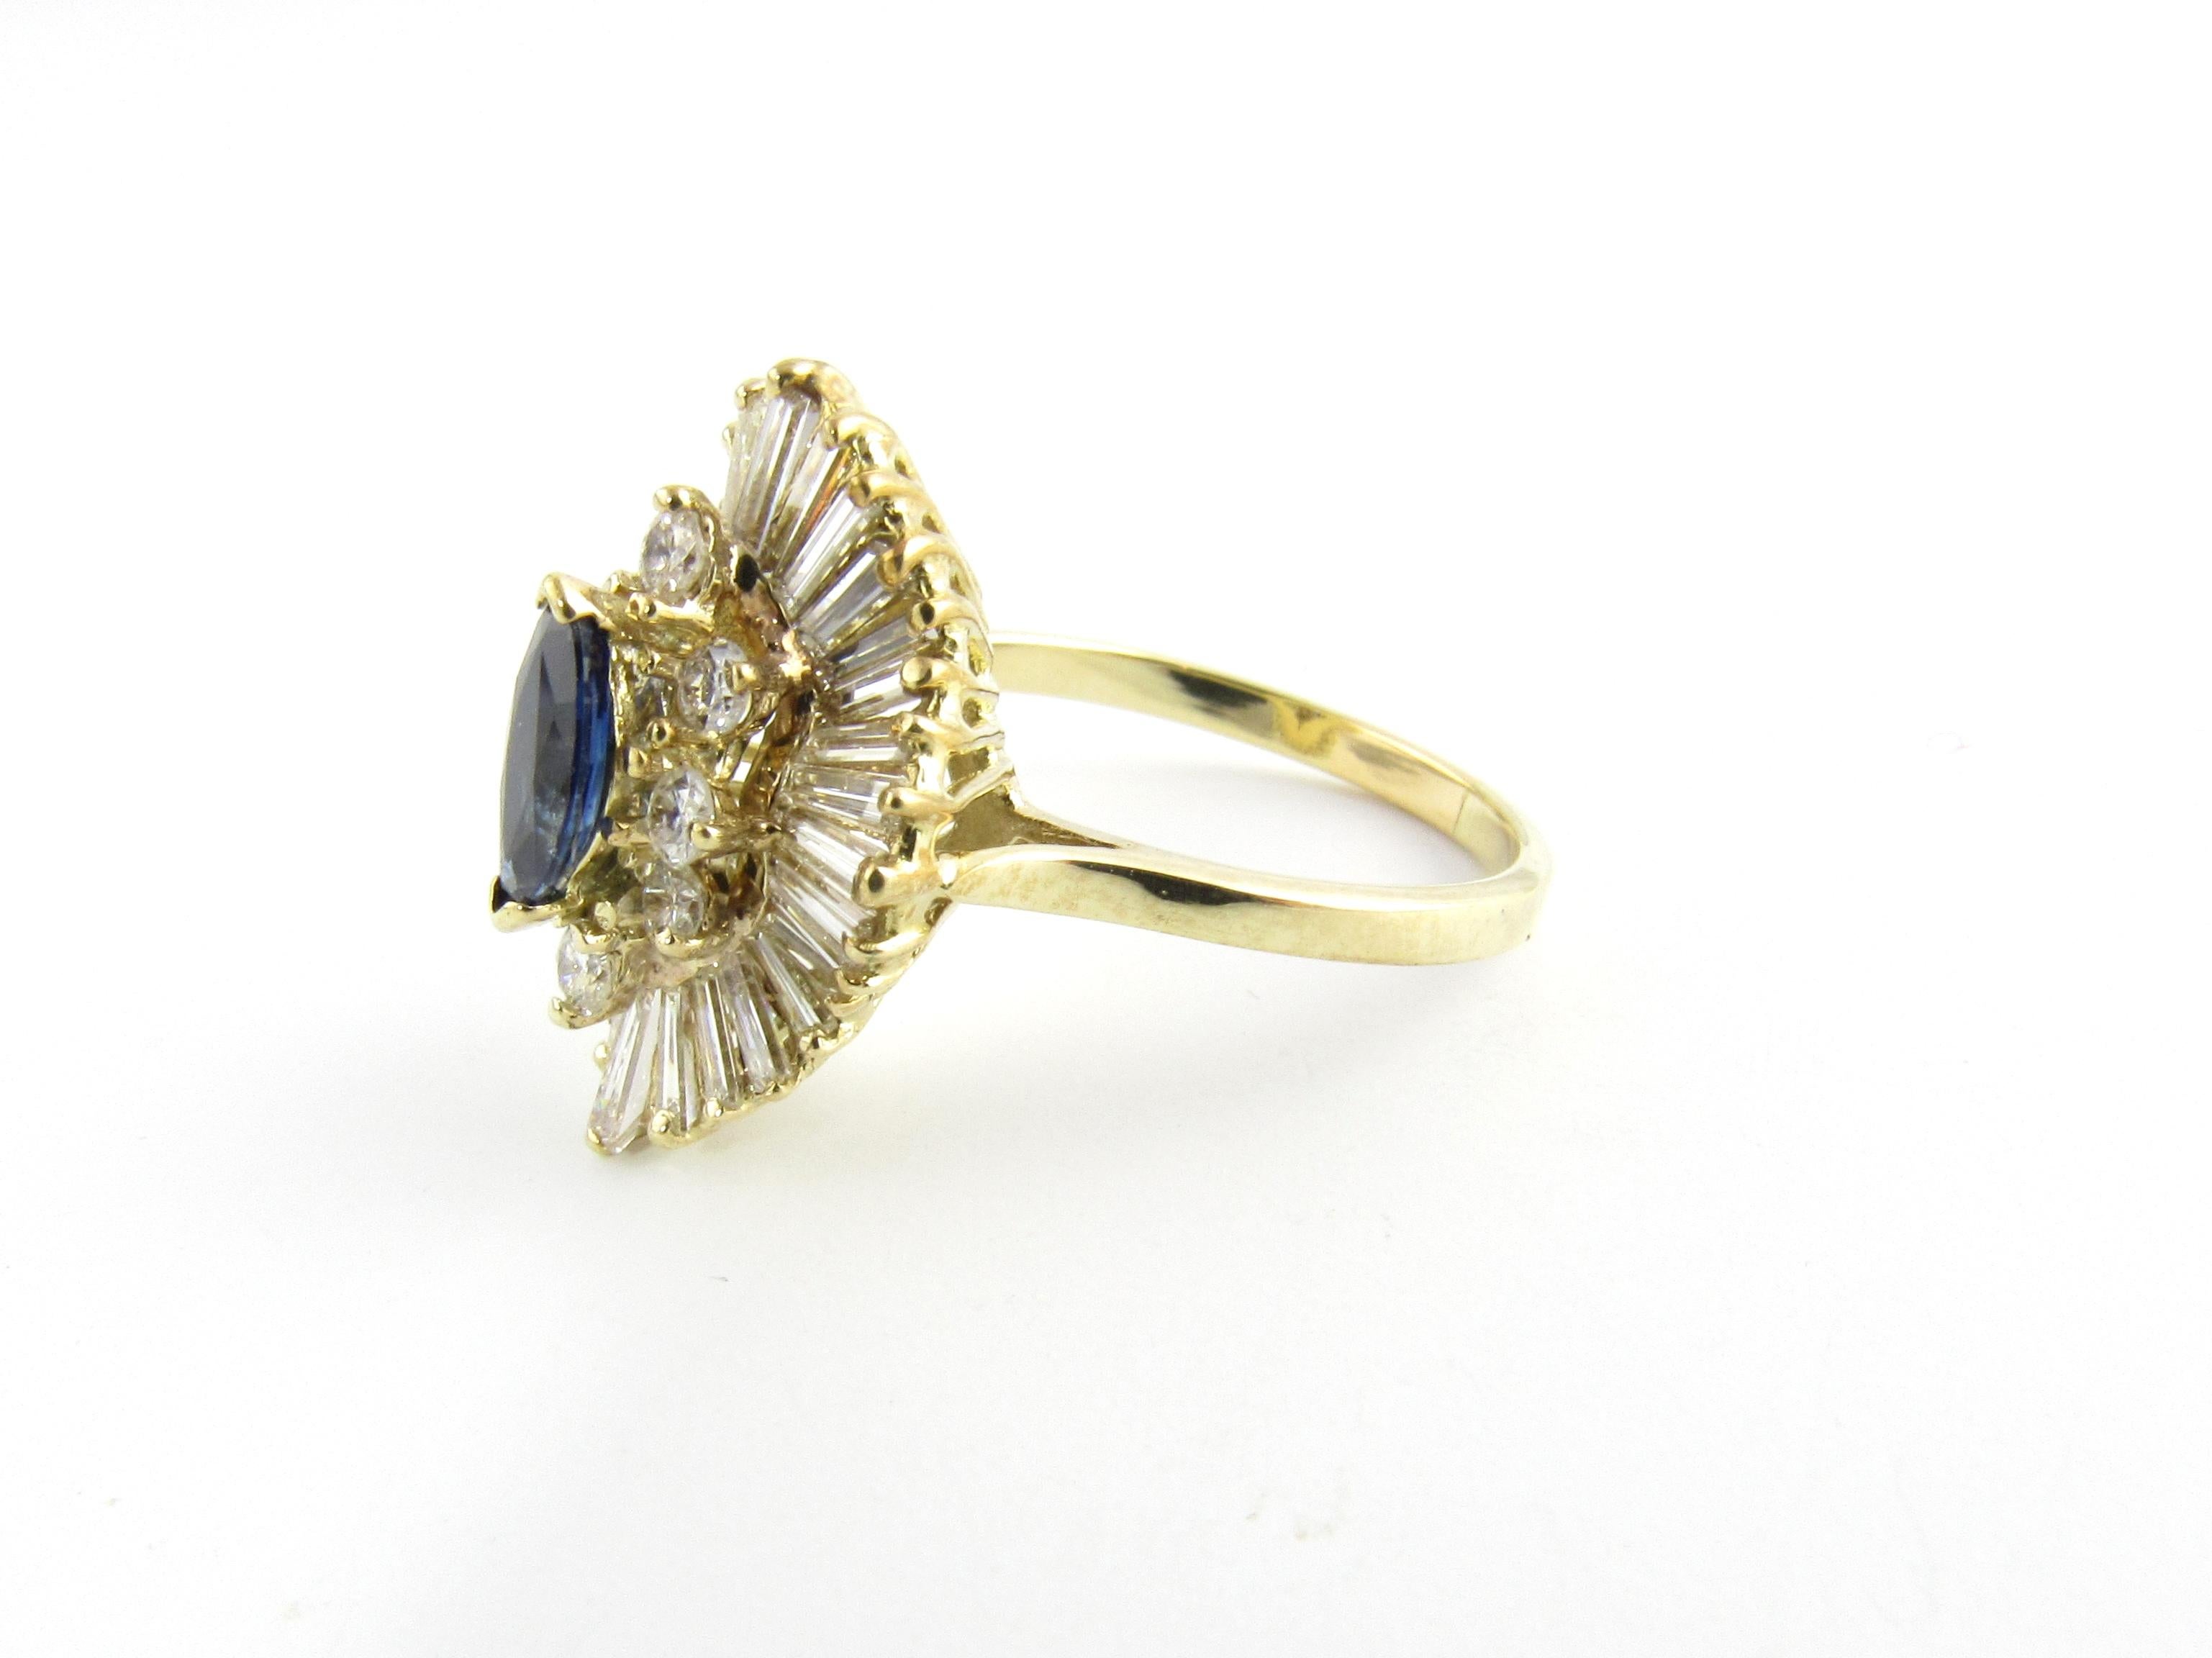 14 Karat Yellow Gold Sapphire and Diamond Ring Size 7.75-

This stunning ring features a genuine marquis sapphire (8 mm x 4 mm) surrounded by eight round diamonds and 32 baguette diamonds in a gorgeous ballerina setting. Top of ring measures 19 mm x